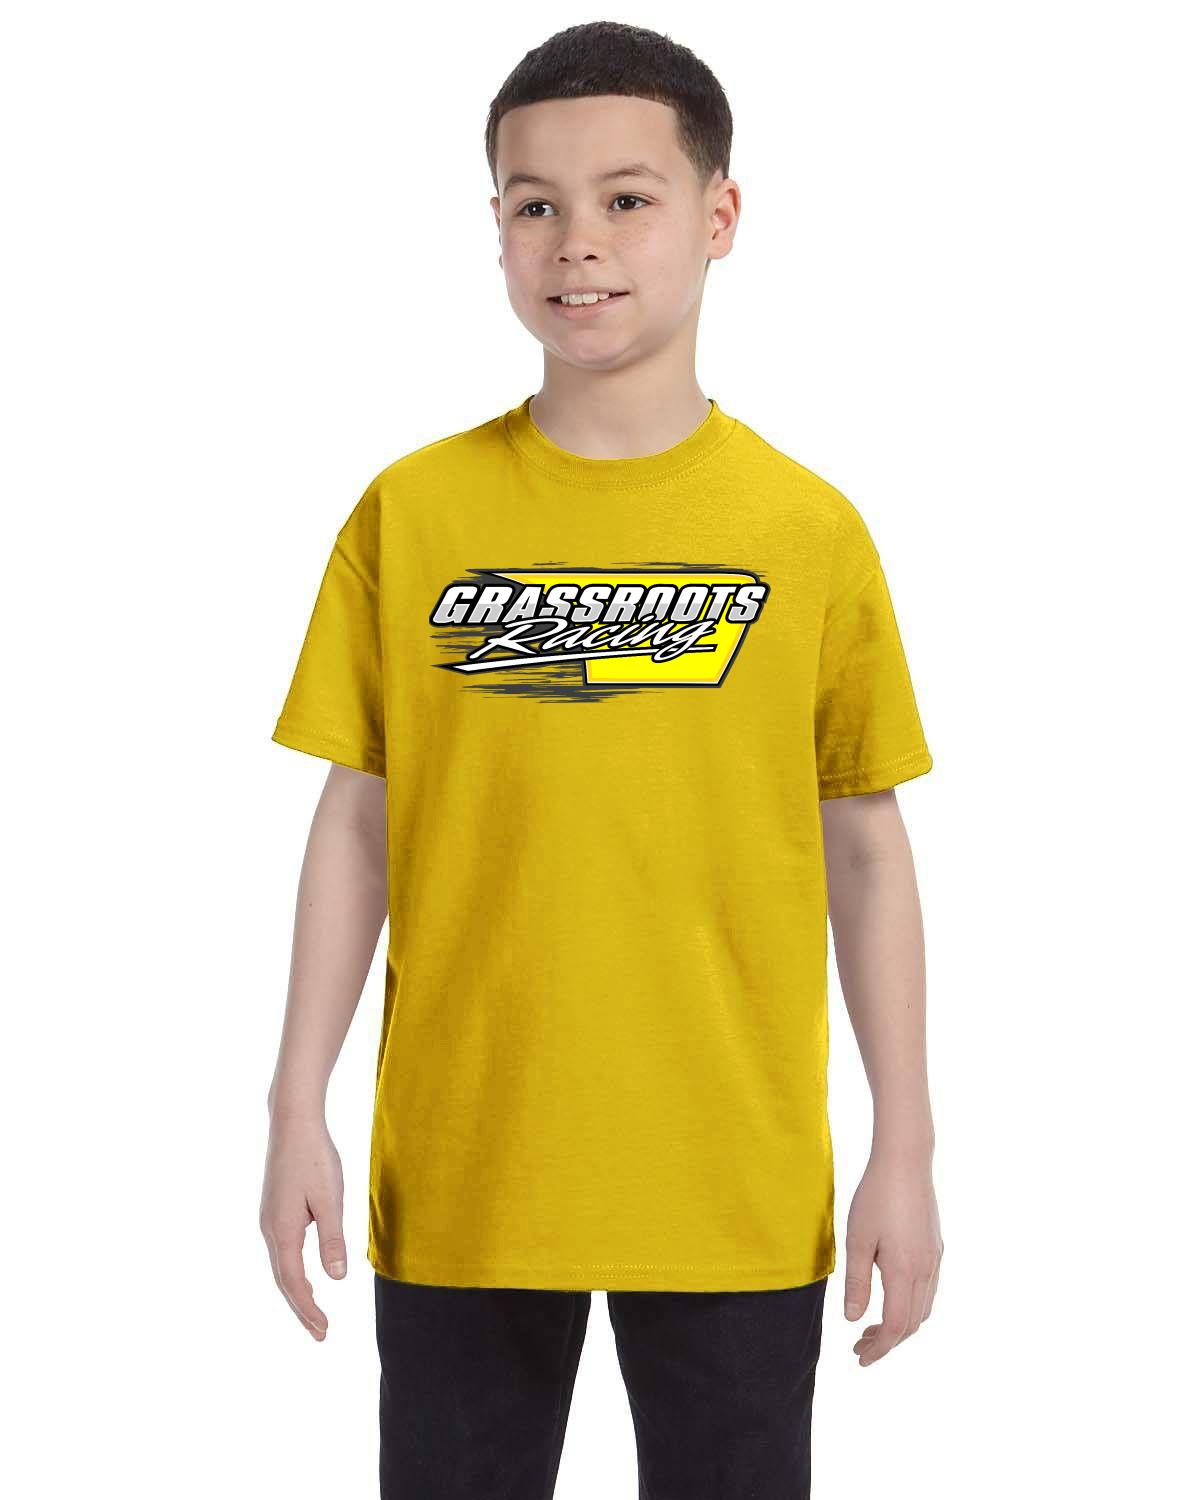 Cole McFadden / Grassroots Racing Name/number Youth tshirt